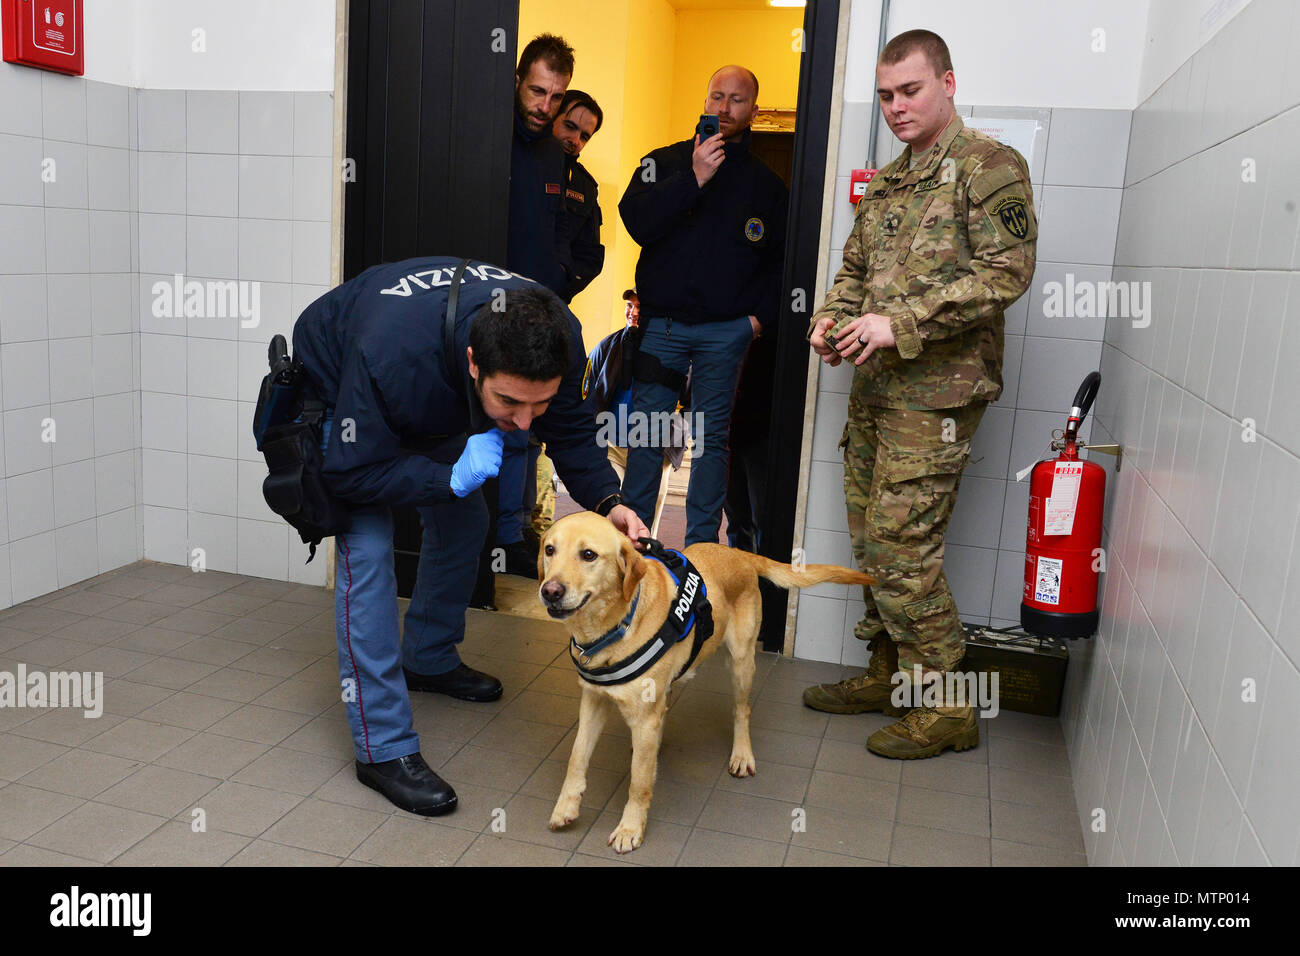 Italian military working dog Thunder and his handler Deputy Inspector Filippo Nicola, assigned to the Italian Police Squadra Cinofili K9 airport Venice, inspect areas that may have explosive residue at Caserma Ederle, Vicenza, Italy, Jan. 17, 2017. Military Working Dog teams are used in patrol, drug and explosive detection and specialized mission functions for the Department of Defense and other government agencies. The 525th Military Working Dog Detachment, joint training with Italian Police Squadra Cinofili K9 airport Venice and Questura di Padova and U.S. Air Force. (U.S. Army photo by Visu Stock Photo